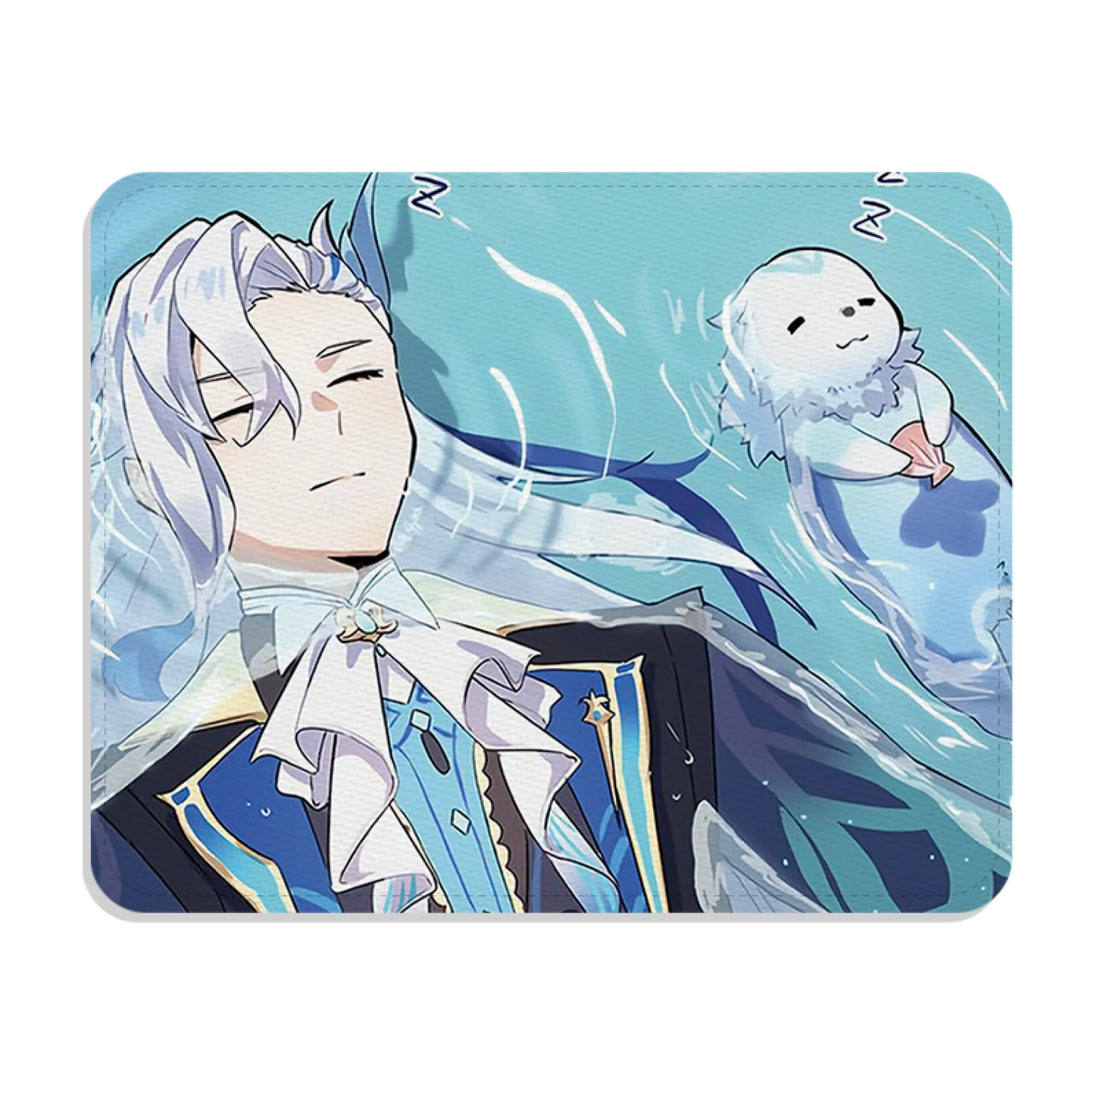 Genshin Impact Character Neuvillette Hd Printing Mouse Pad A